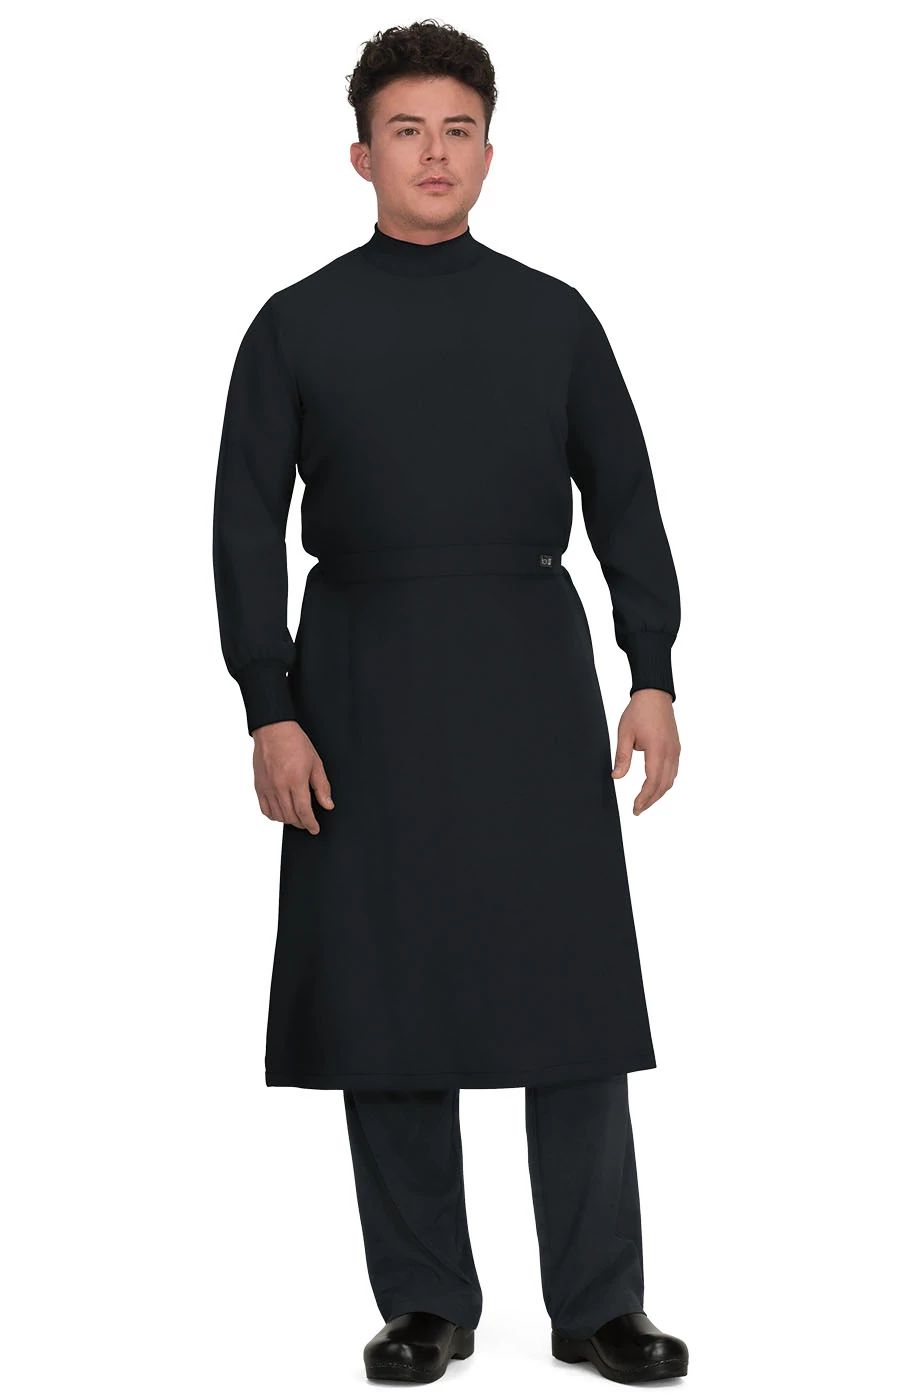 clinical-cover-gown-black